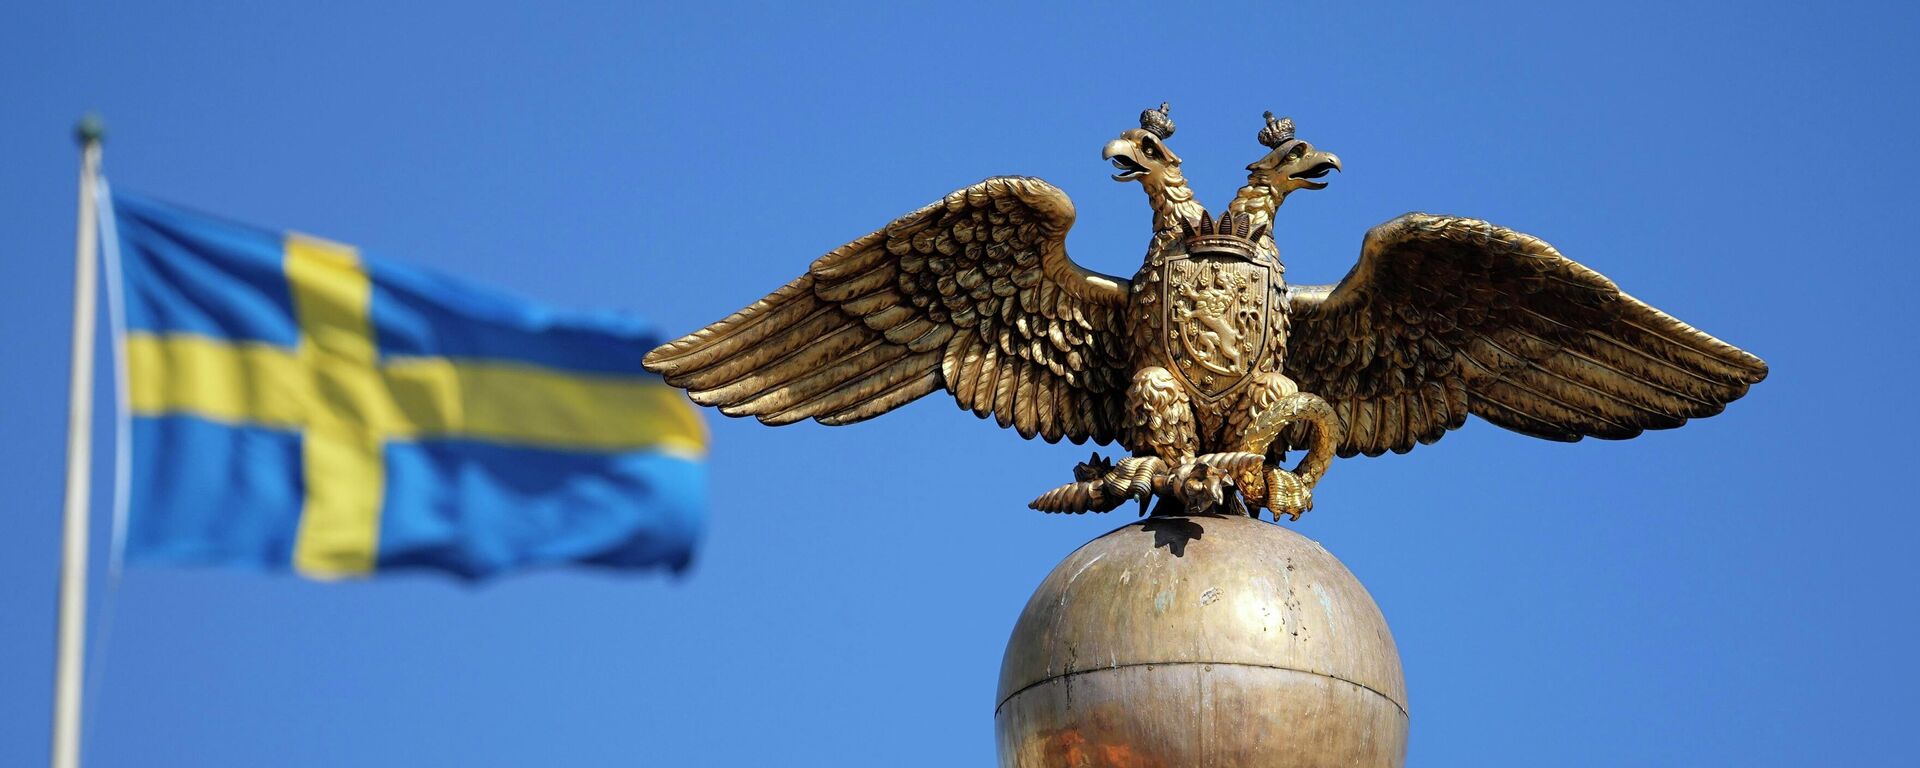 A Russian Imperial double-headed eagle is seen in front of a Sweden flag on the Czarina's Stone in the Market Square, in Helsinki, Finland, Friday, May 13, 2022. - Sputnik International, 1920, 15.05.2022